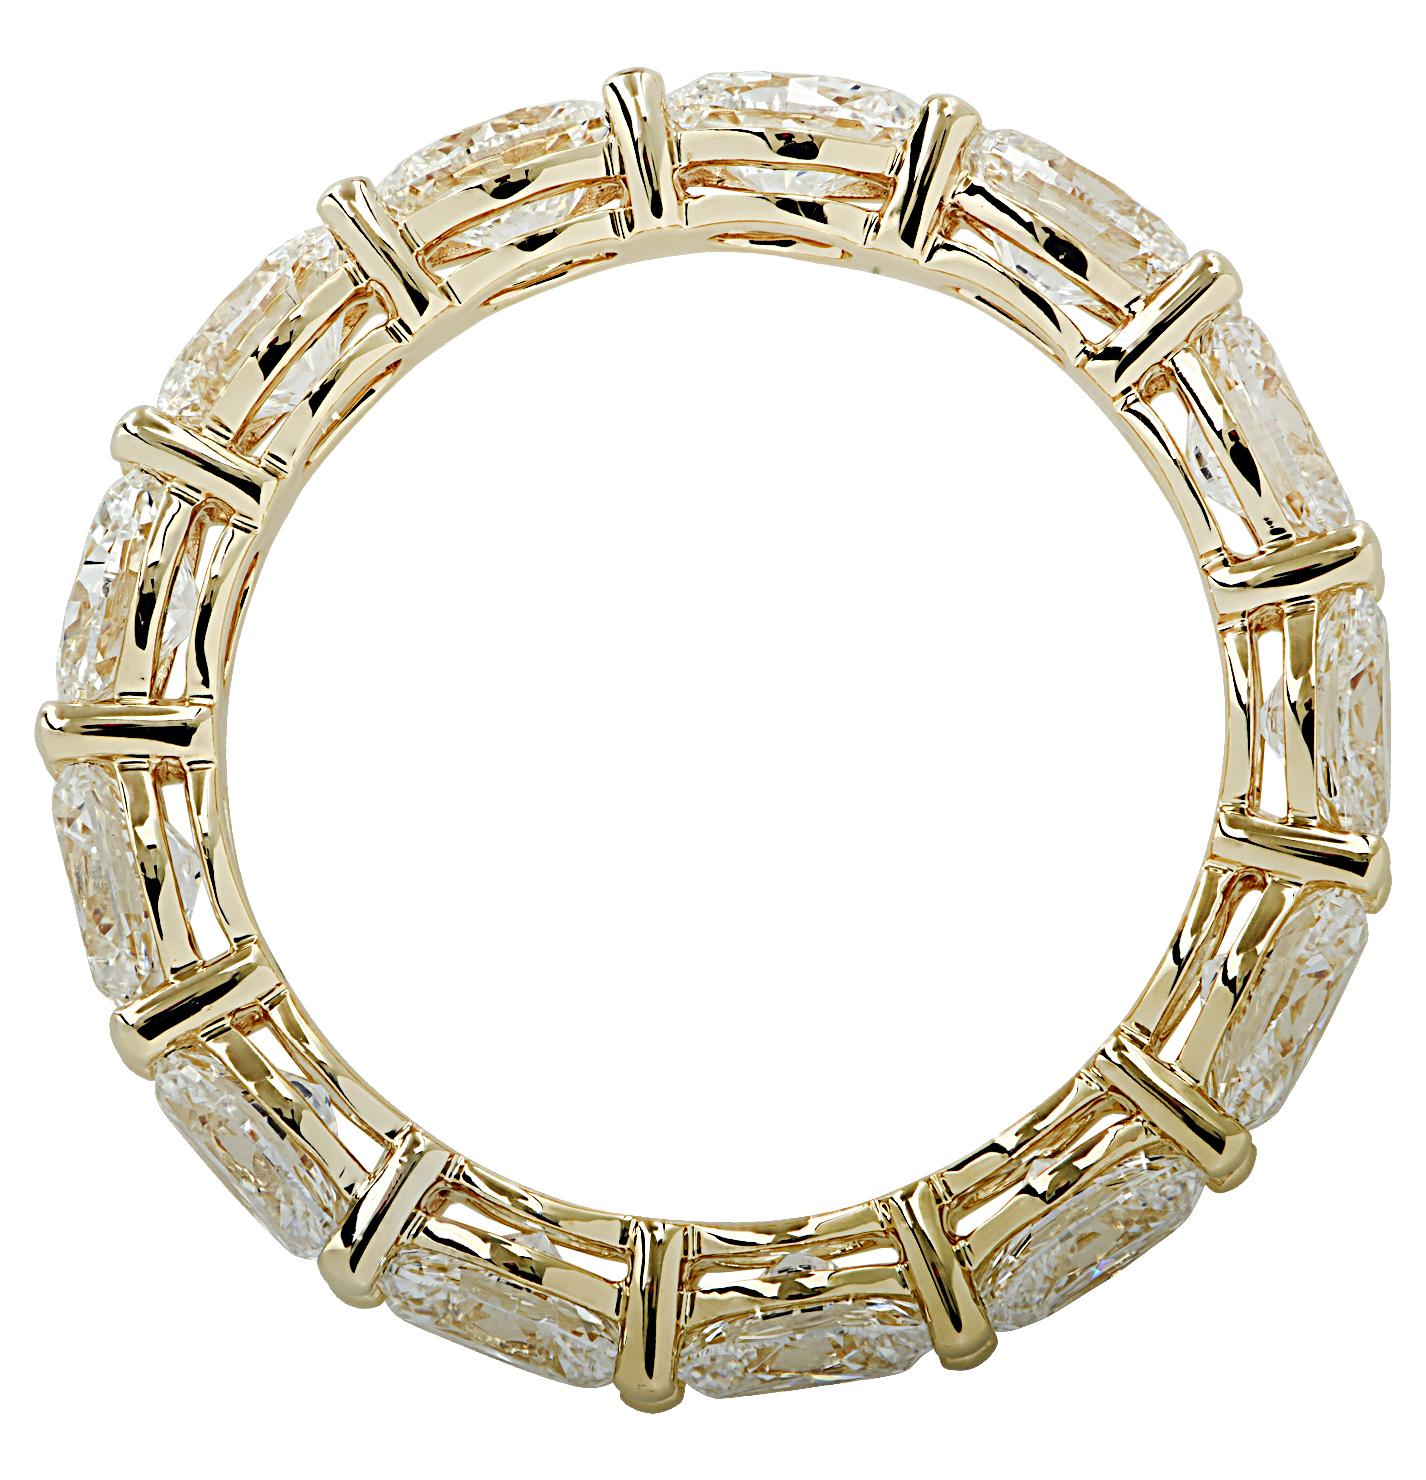 Stunning Vivid Diamonds Eternity Band crafted in 18 karat yellow gold, featuring 13 oval cut diamonds weighing 3.09 carats total, E-F color, VS clarity. The diamonds were carefully selected, perfectly matched and set East-West in a spectacular